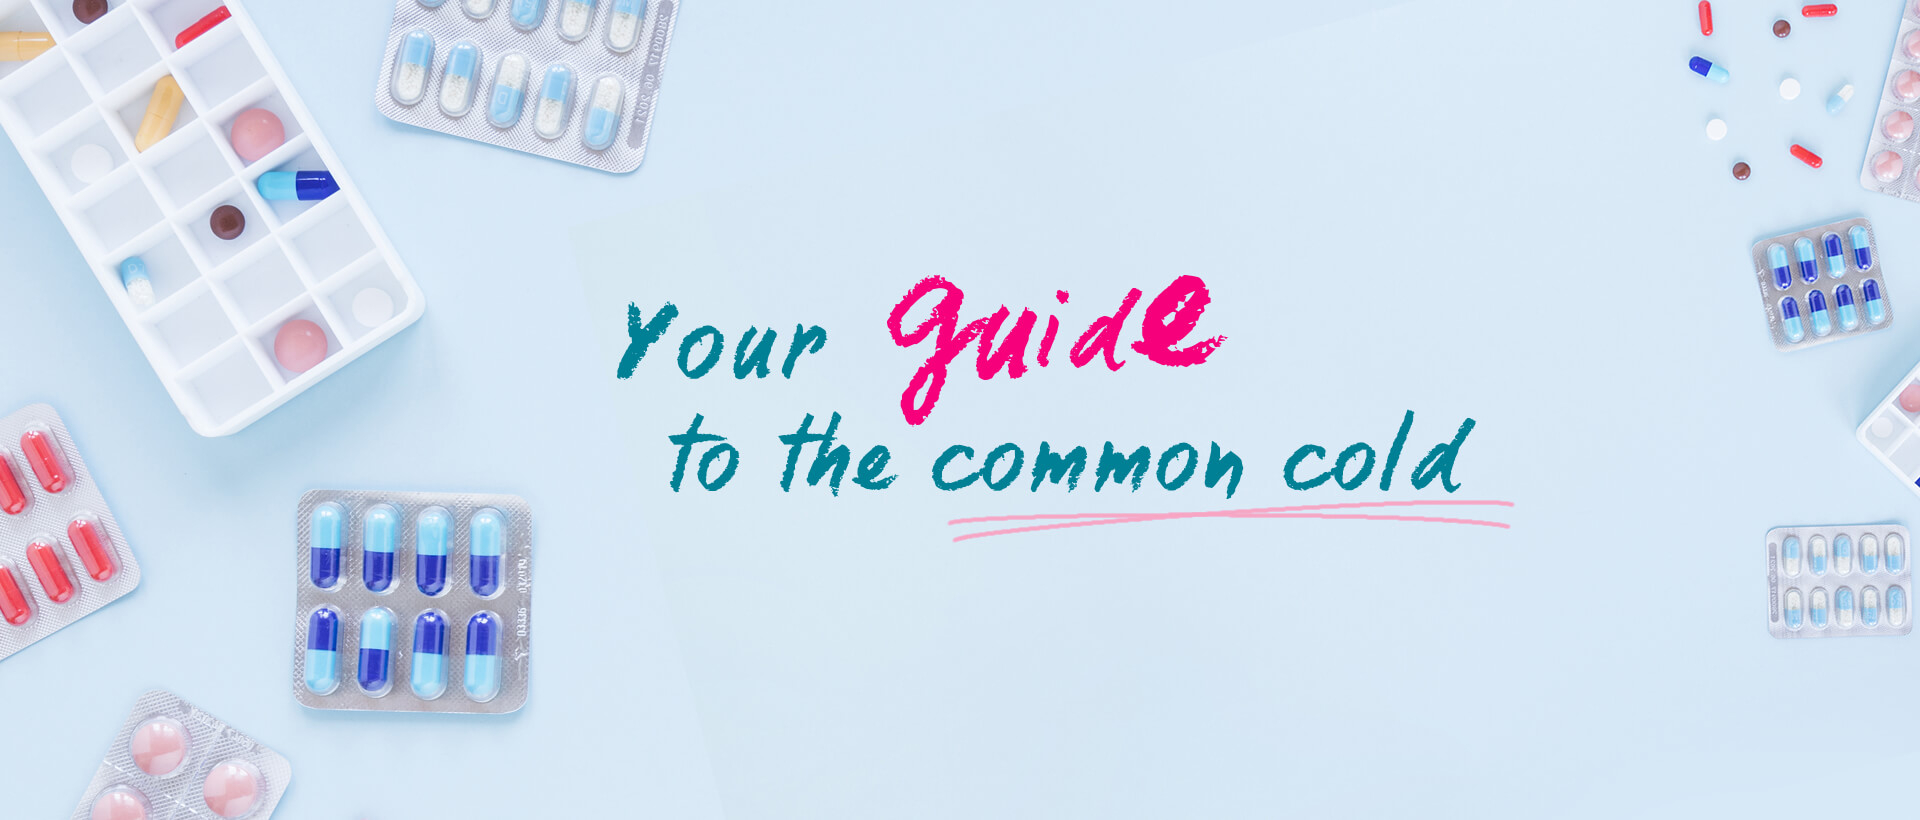 Your guide to the common cold